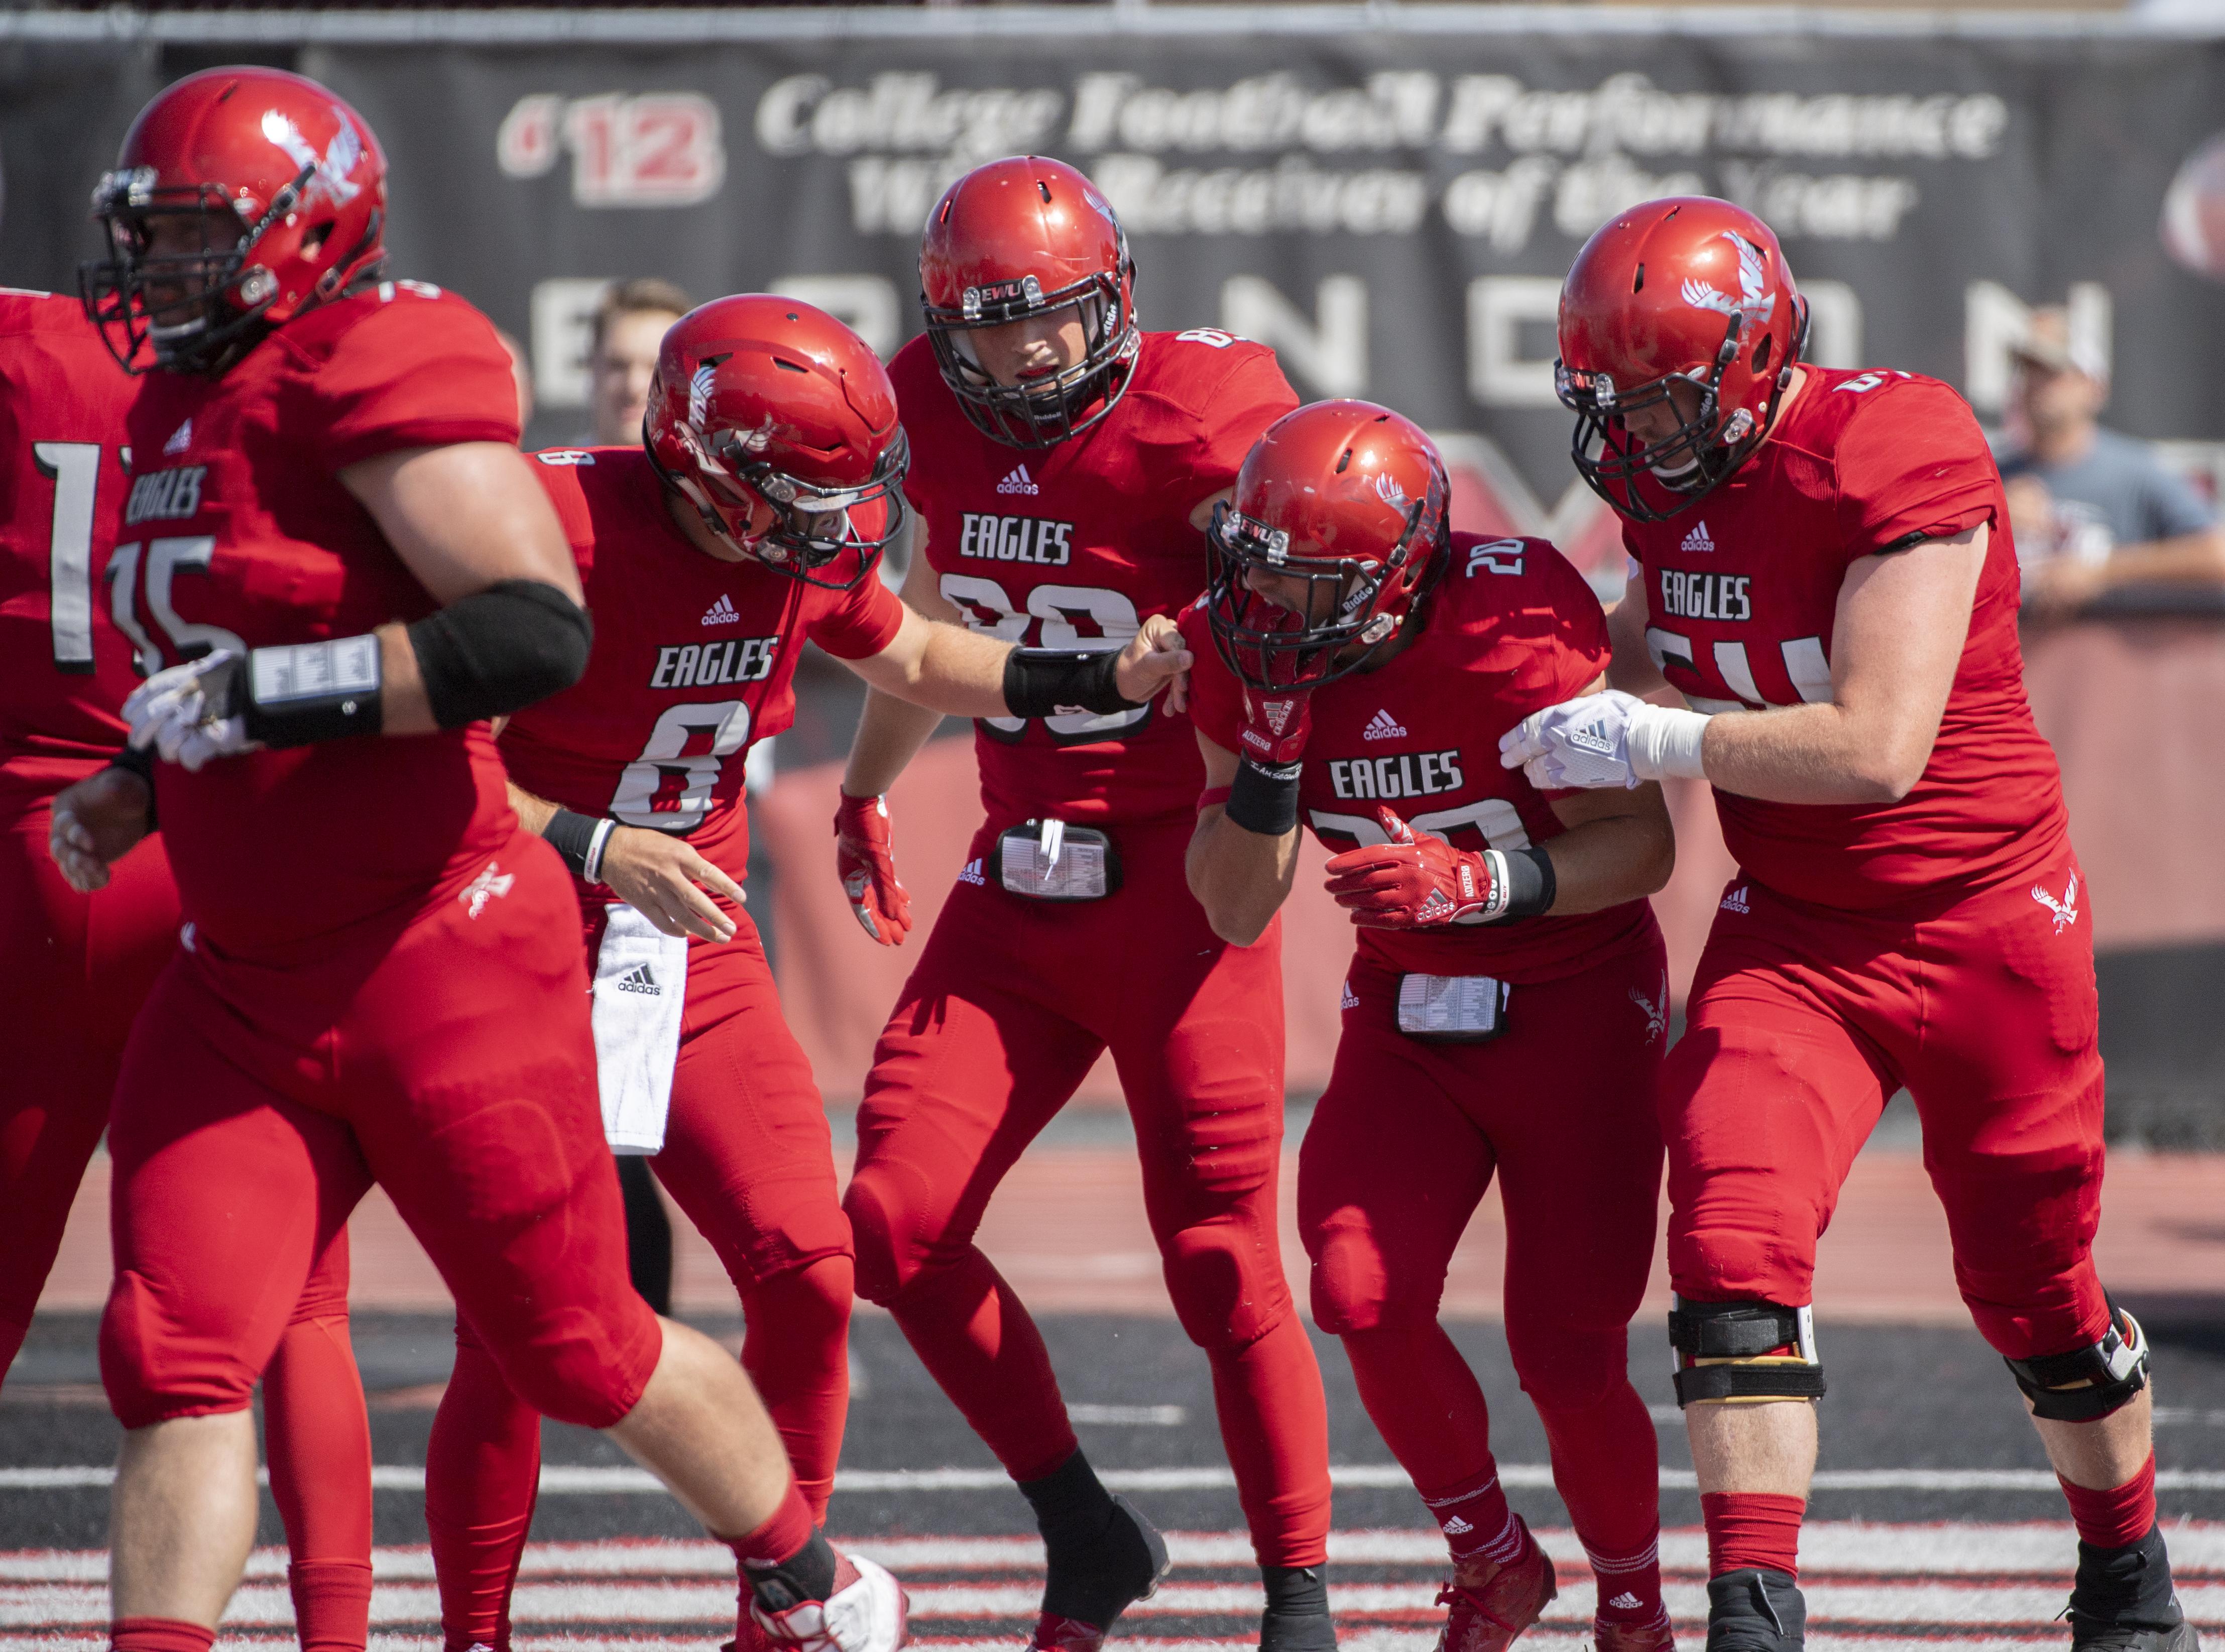 Eastern Washington earns No. 3 seed and firstround bye in FCS playoffs